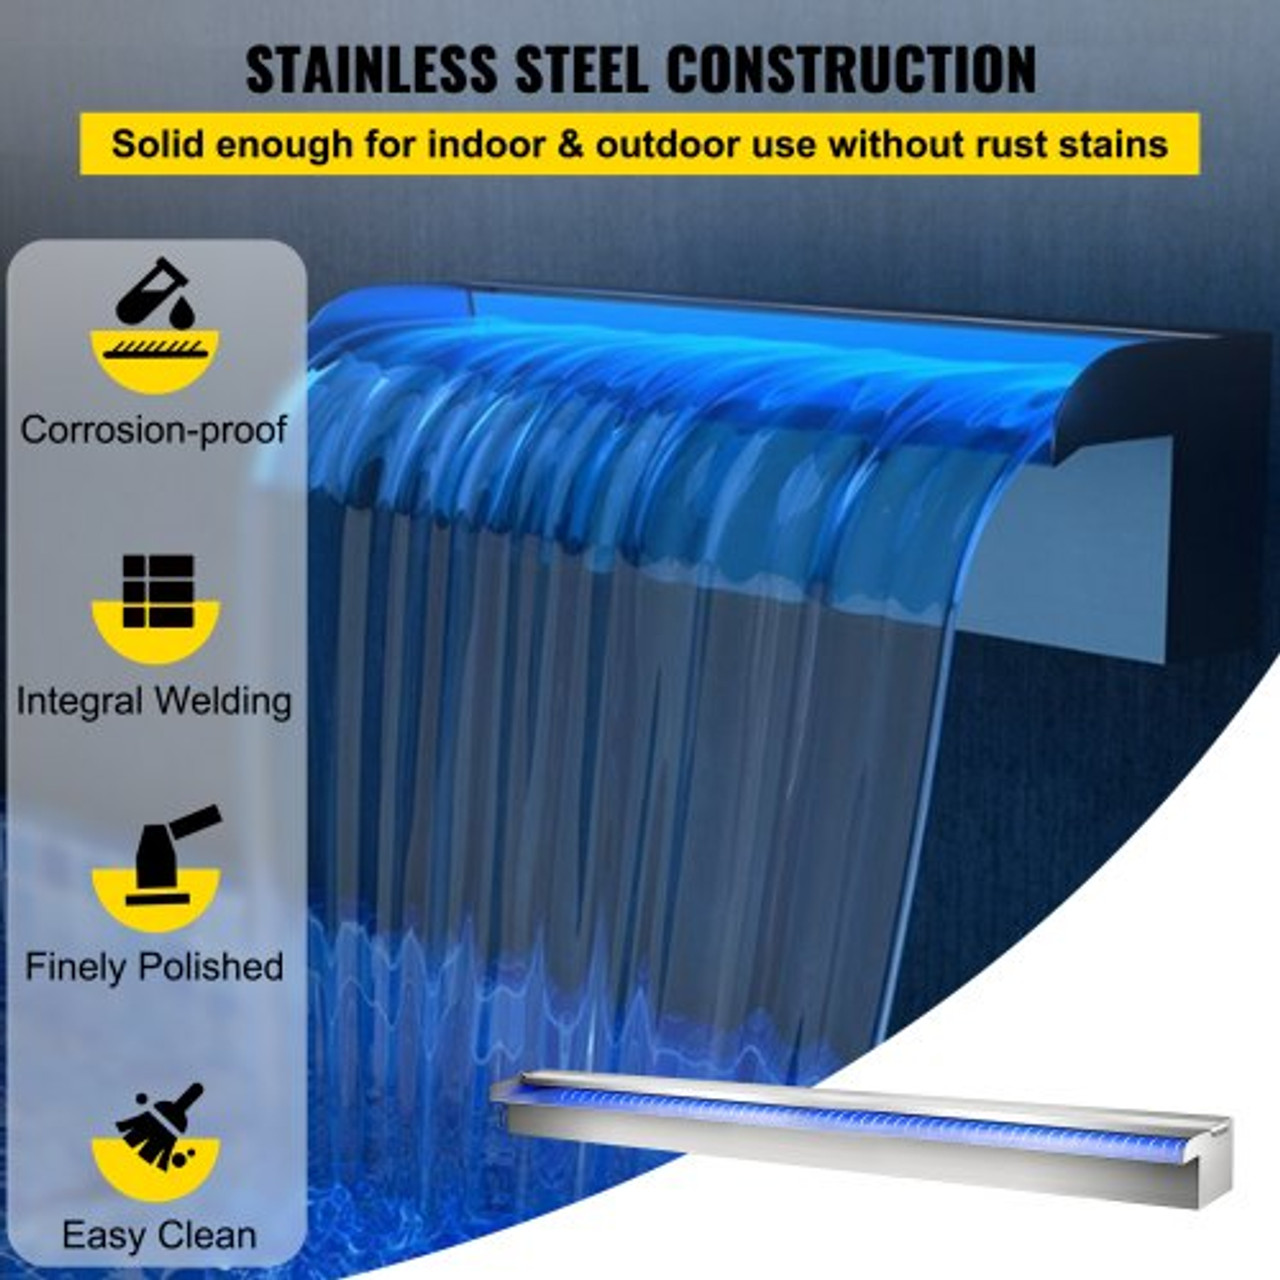 Pool Fountain Stainless Steel Pool Waterfall 59.4" x 4.5" x 3.1"(W x D x H) with LED Strip Light Waterfall Spillway Rectangular Garden Outdoor